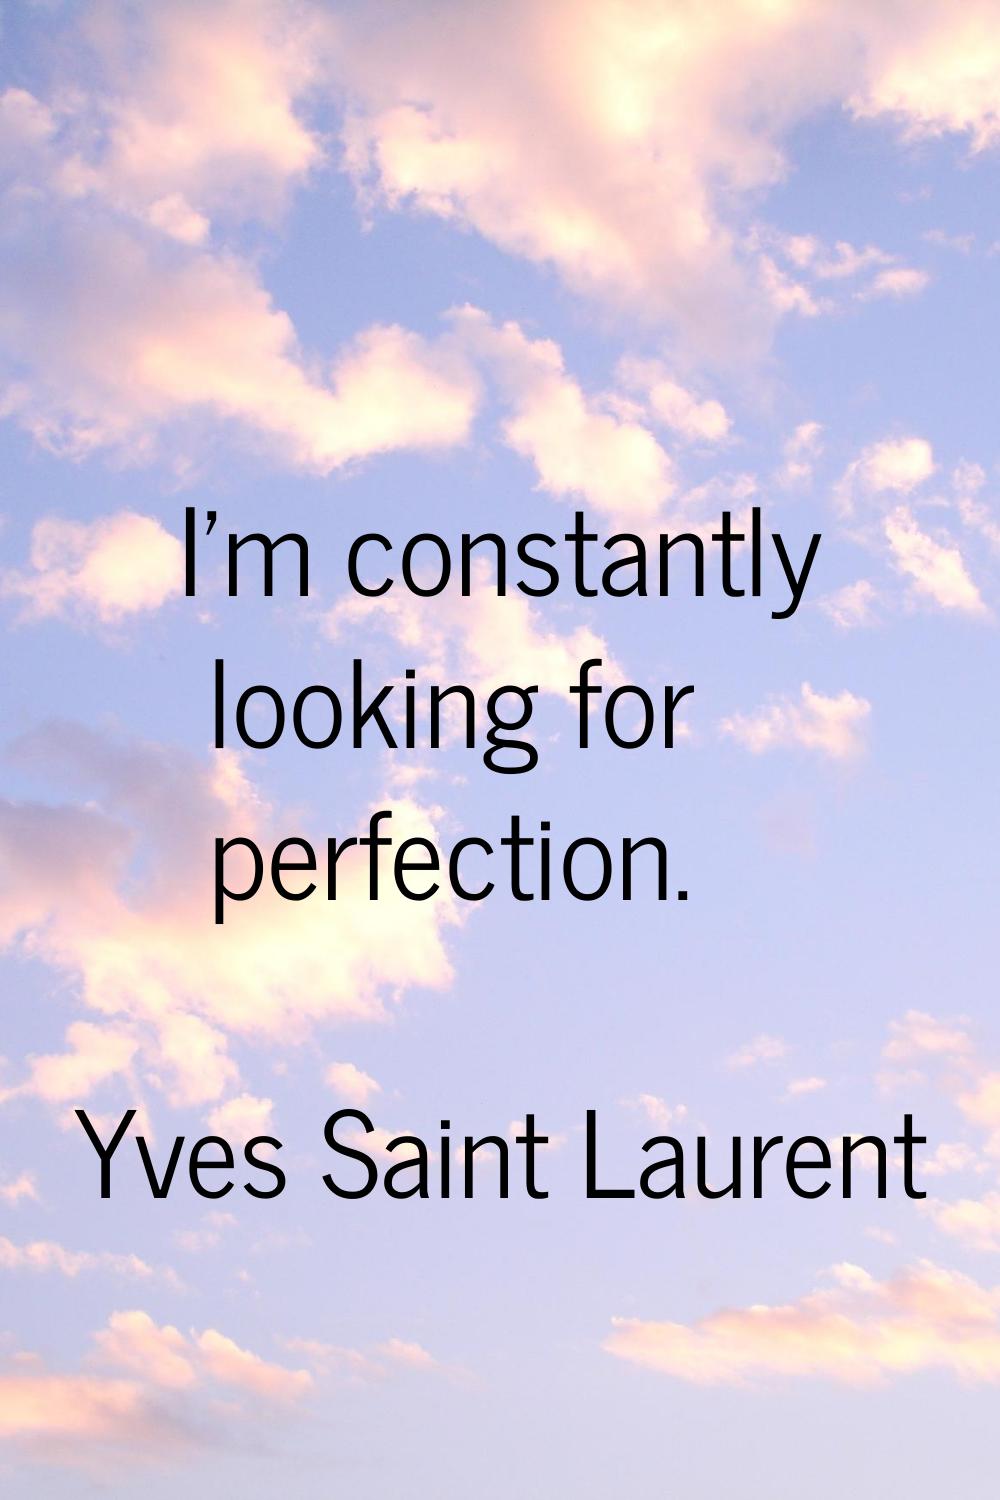 I'm constantly looking for perfection.